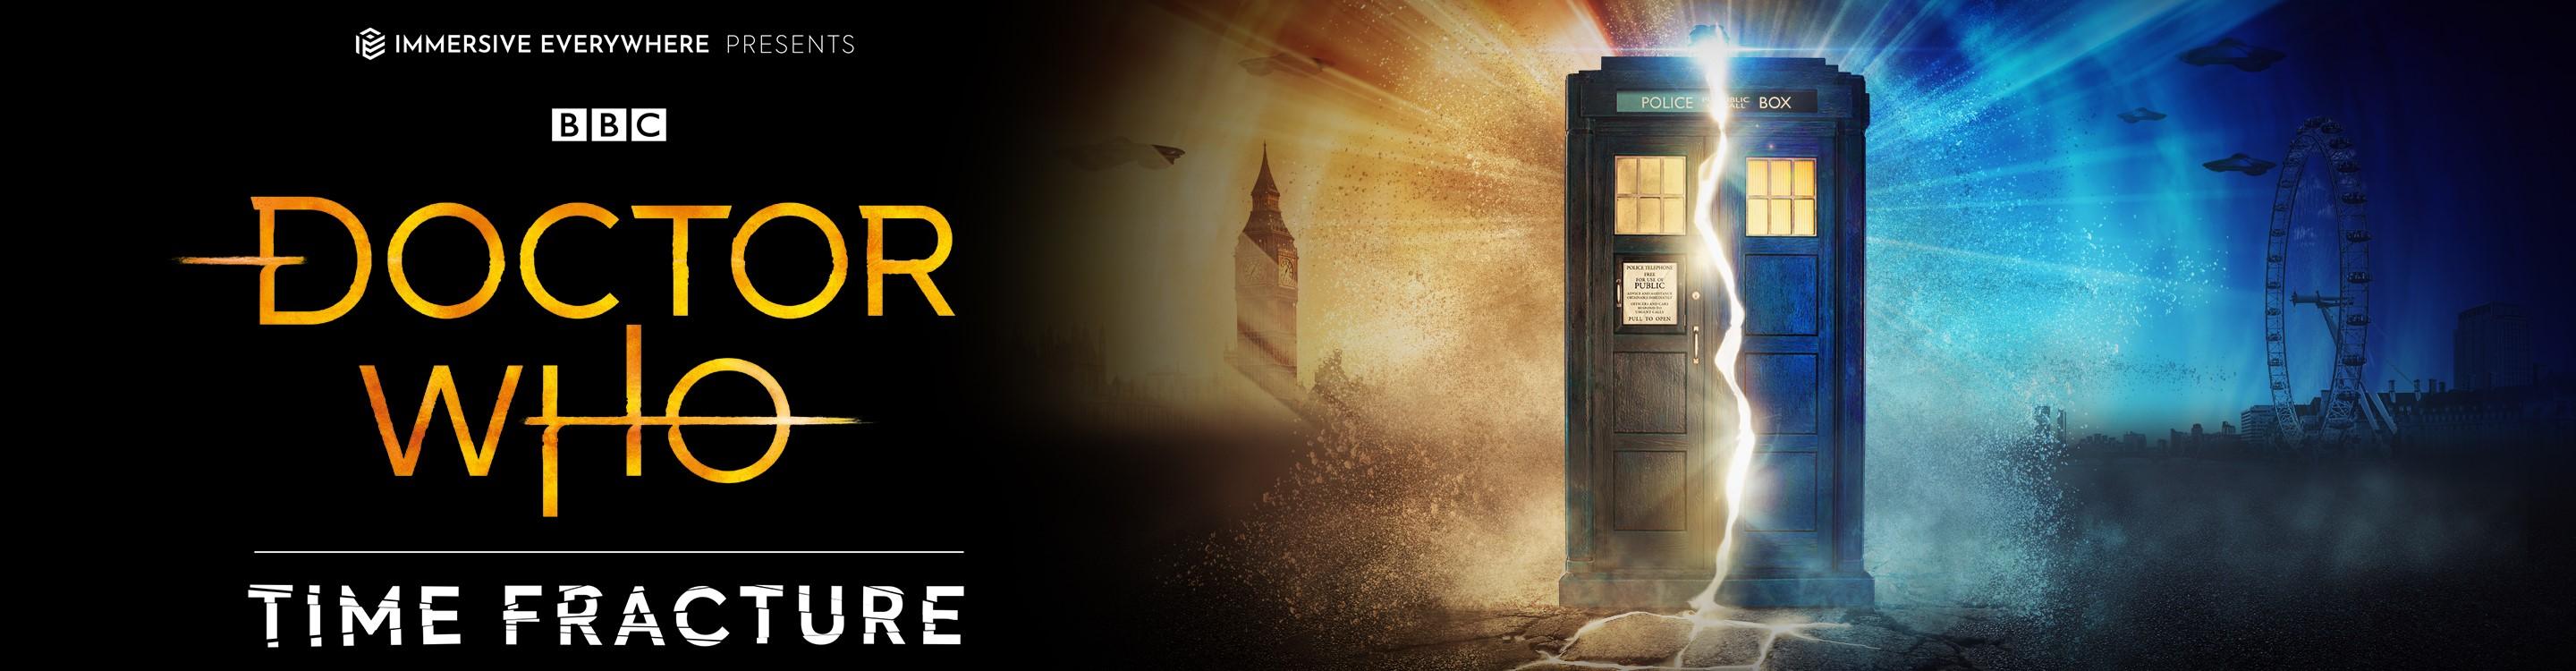 Image of text that says Doctor Who Time Fracture with illustration of the Tardis